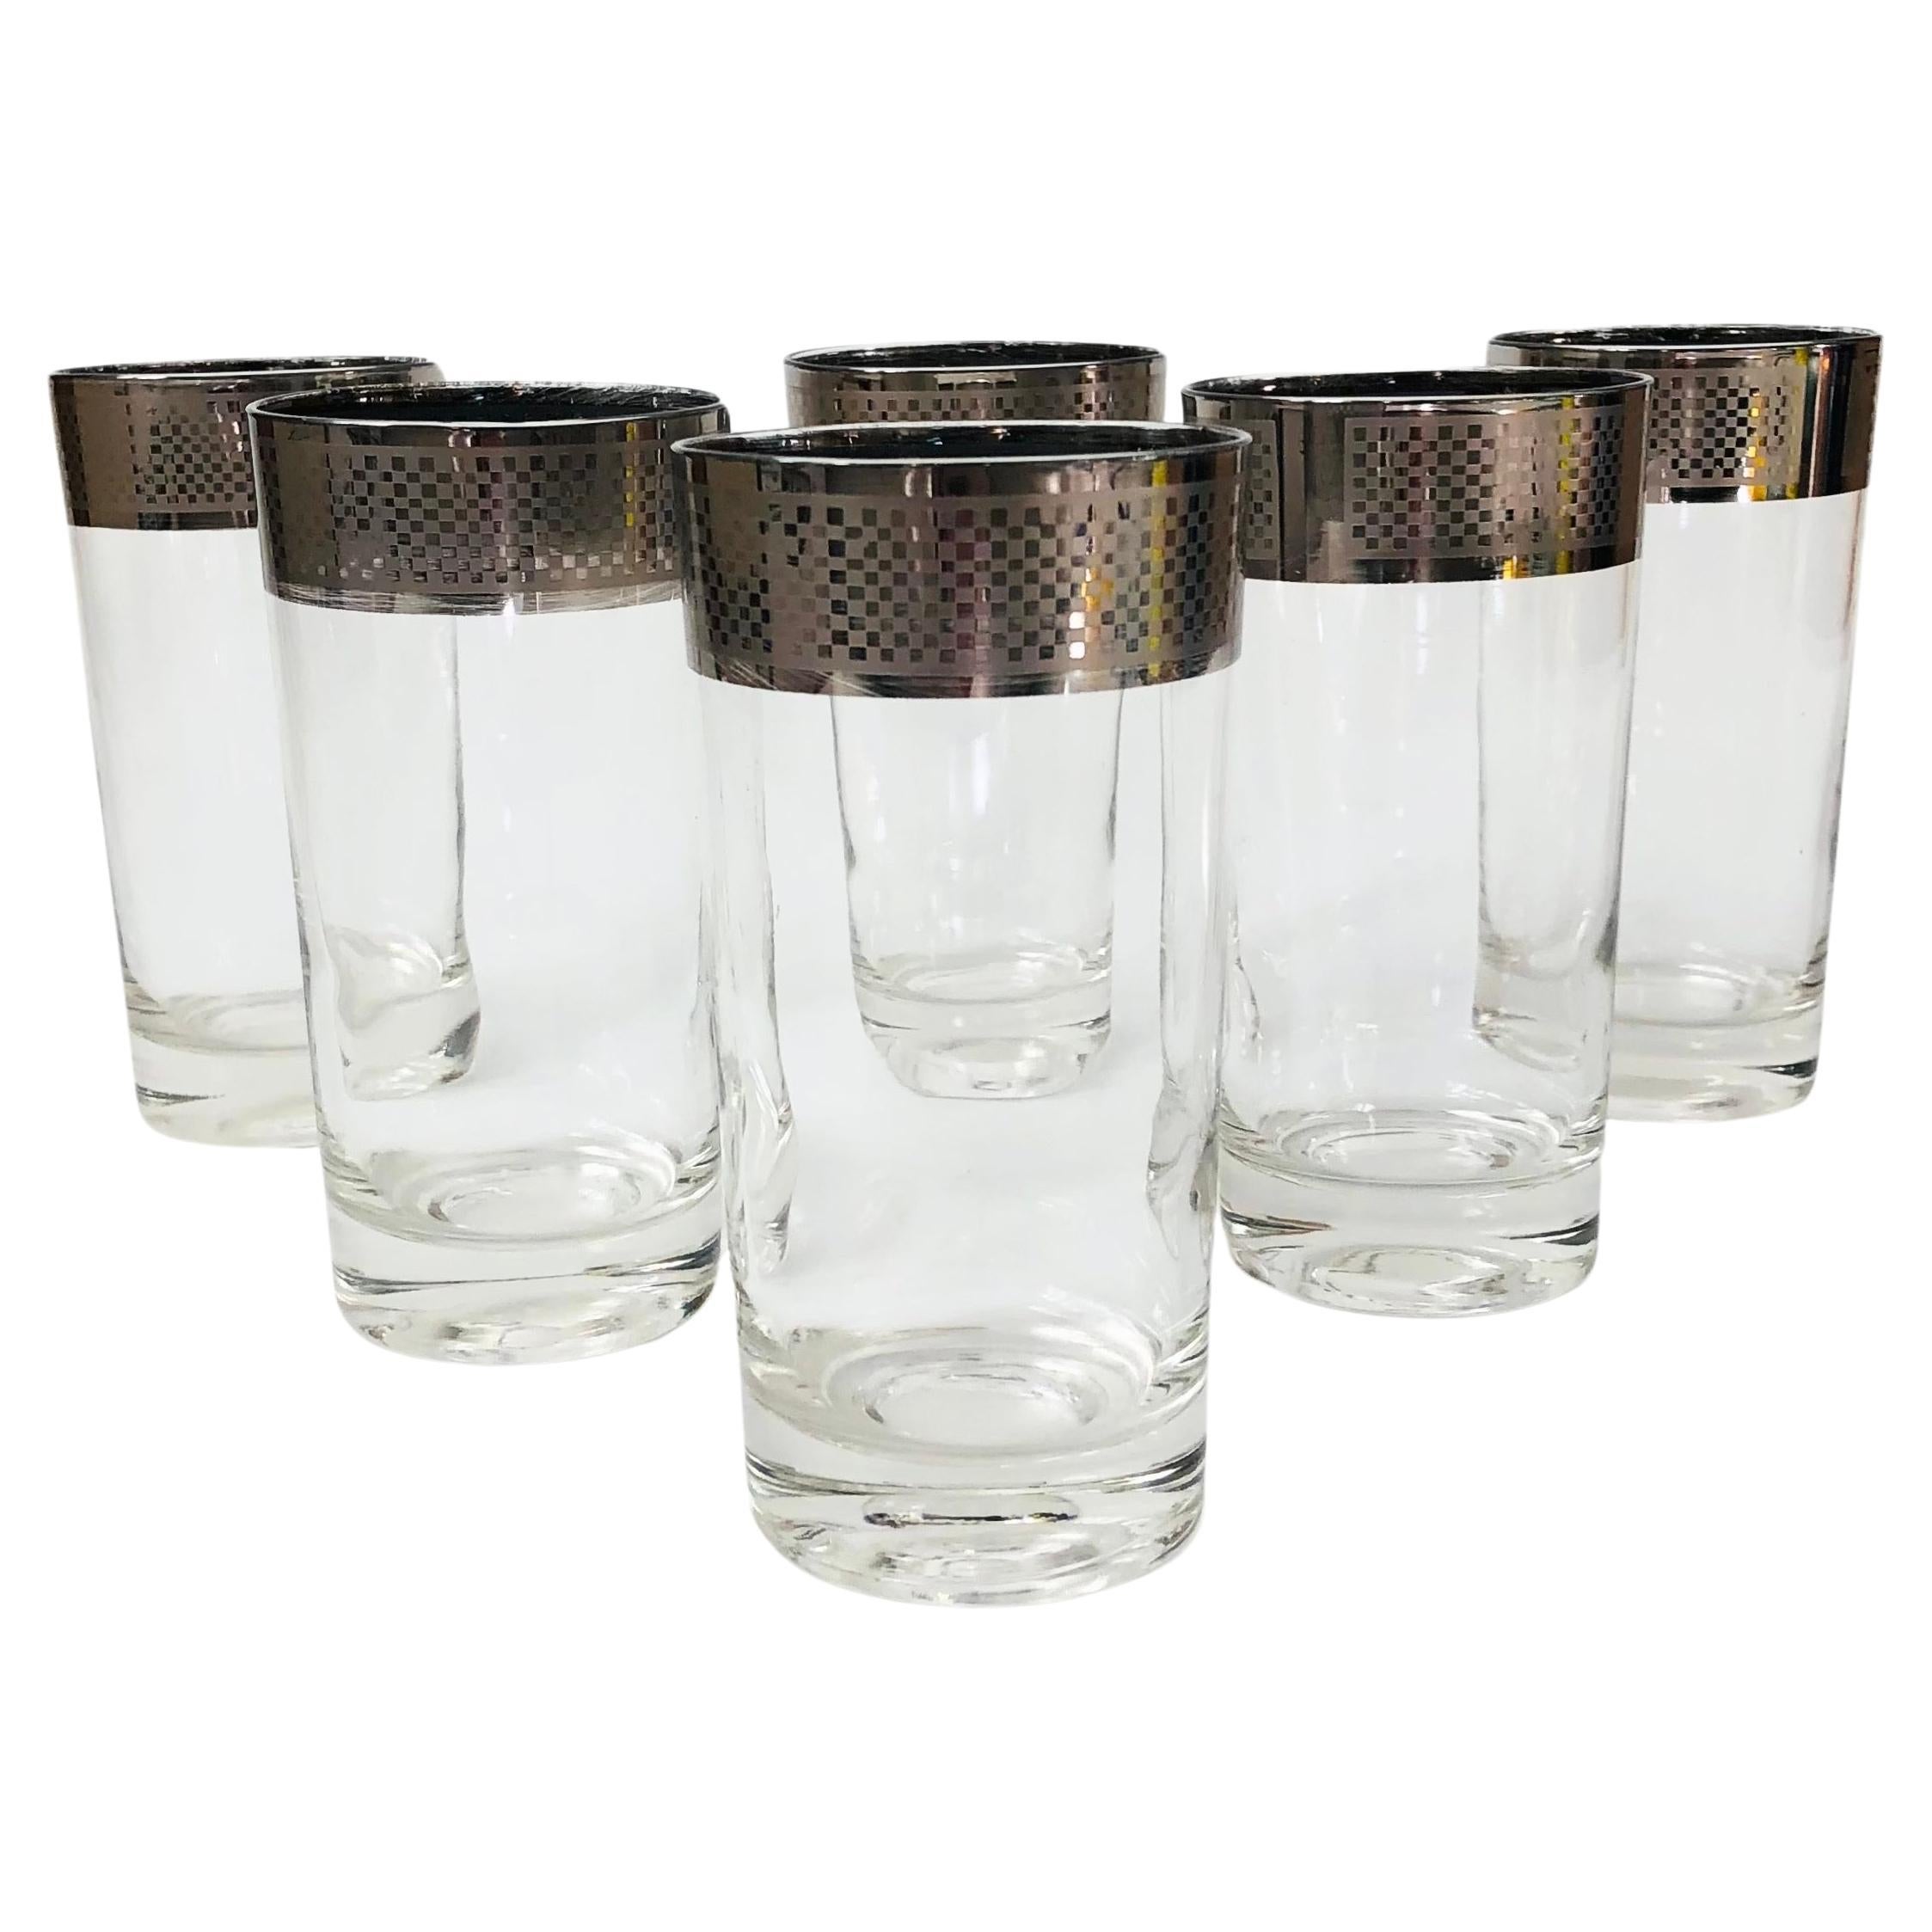 Mid Century Checkered Silver Rim Tumblers - Set of 6